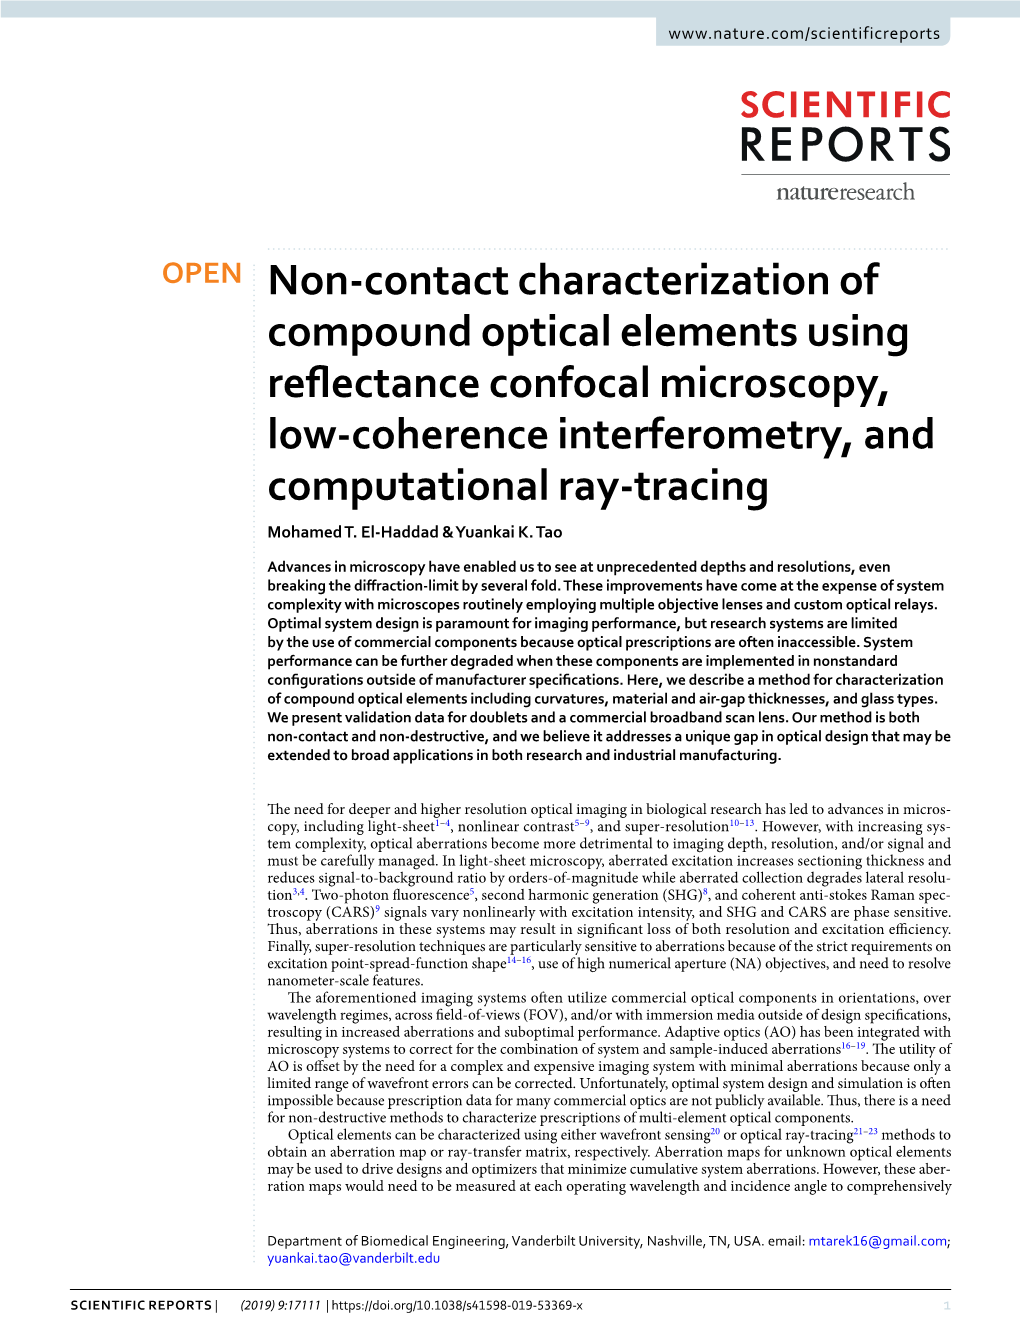 Non-Contact Characterization of Compound Optical Elements Using Refectance Confocal Microscopy, Low-Coherence Interferometry, and Computational Ray-Tracing Mohamed T